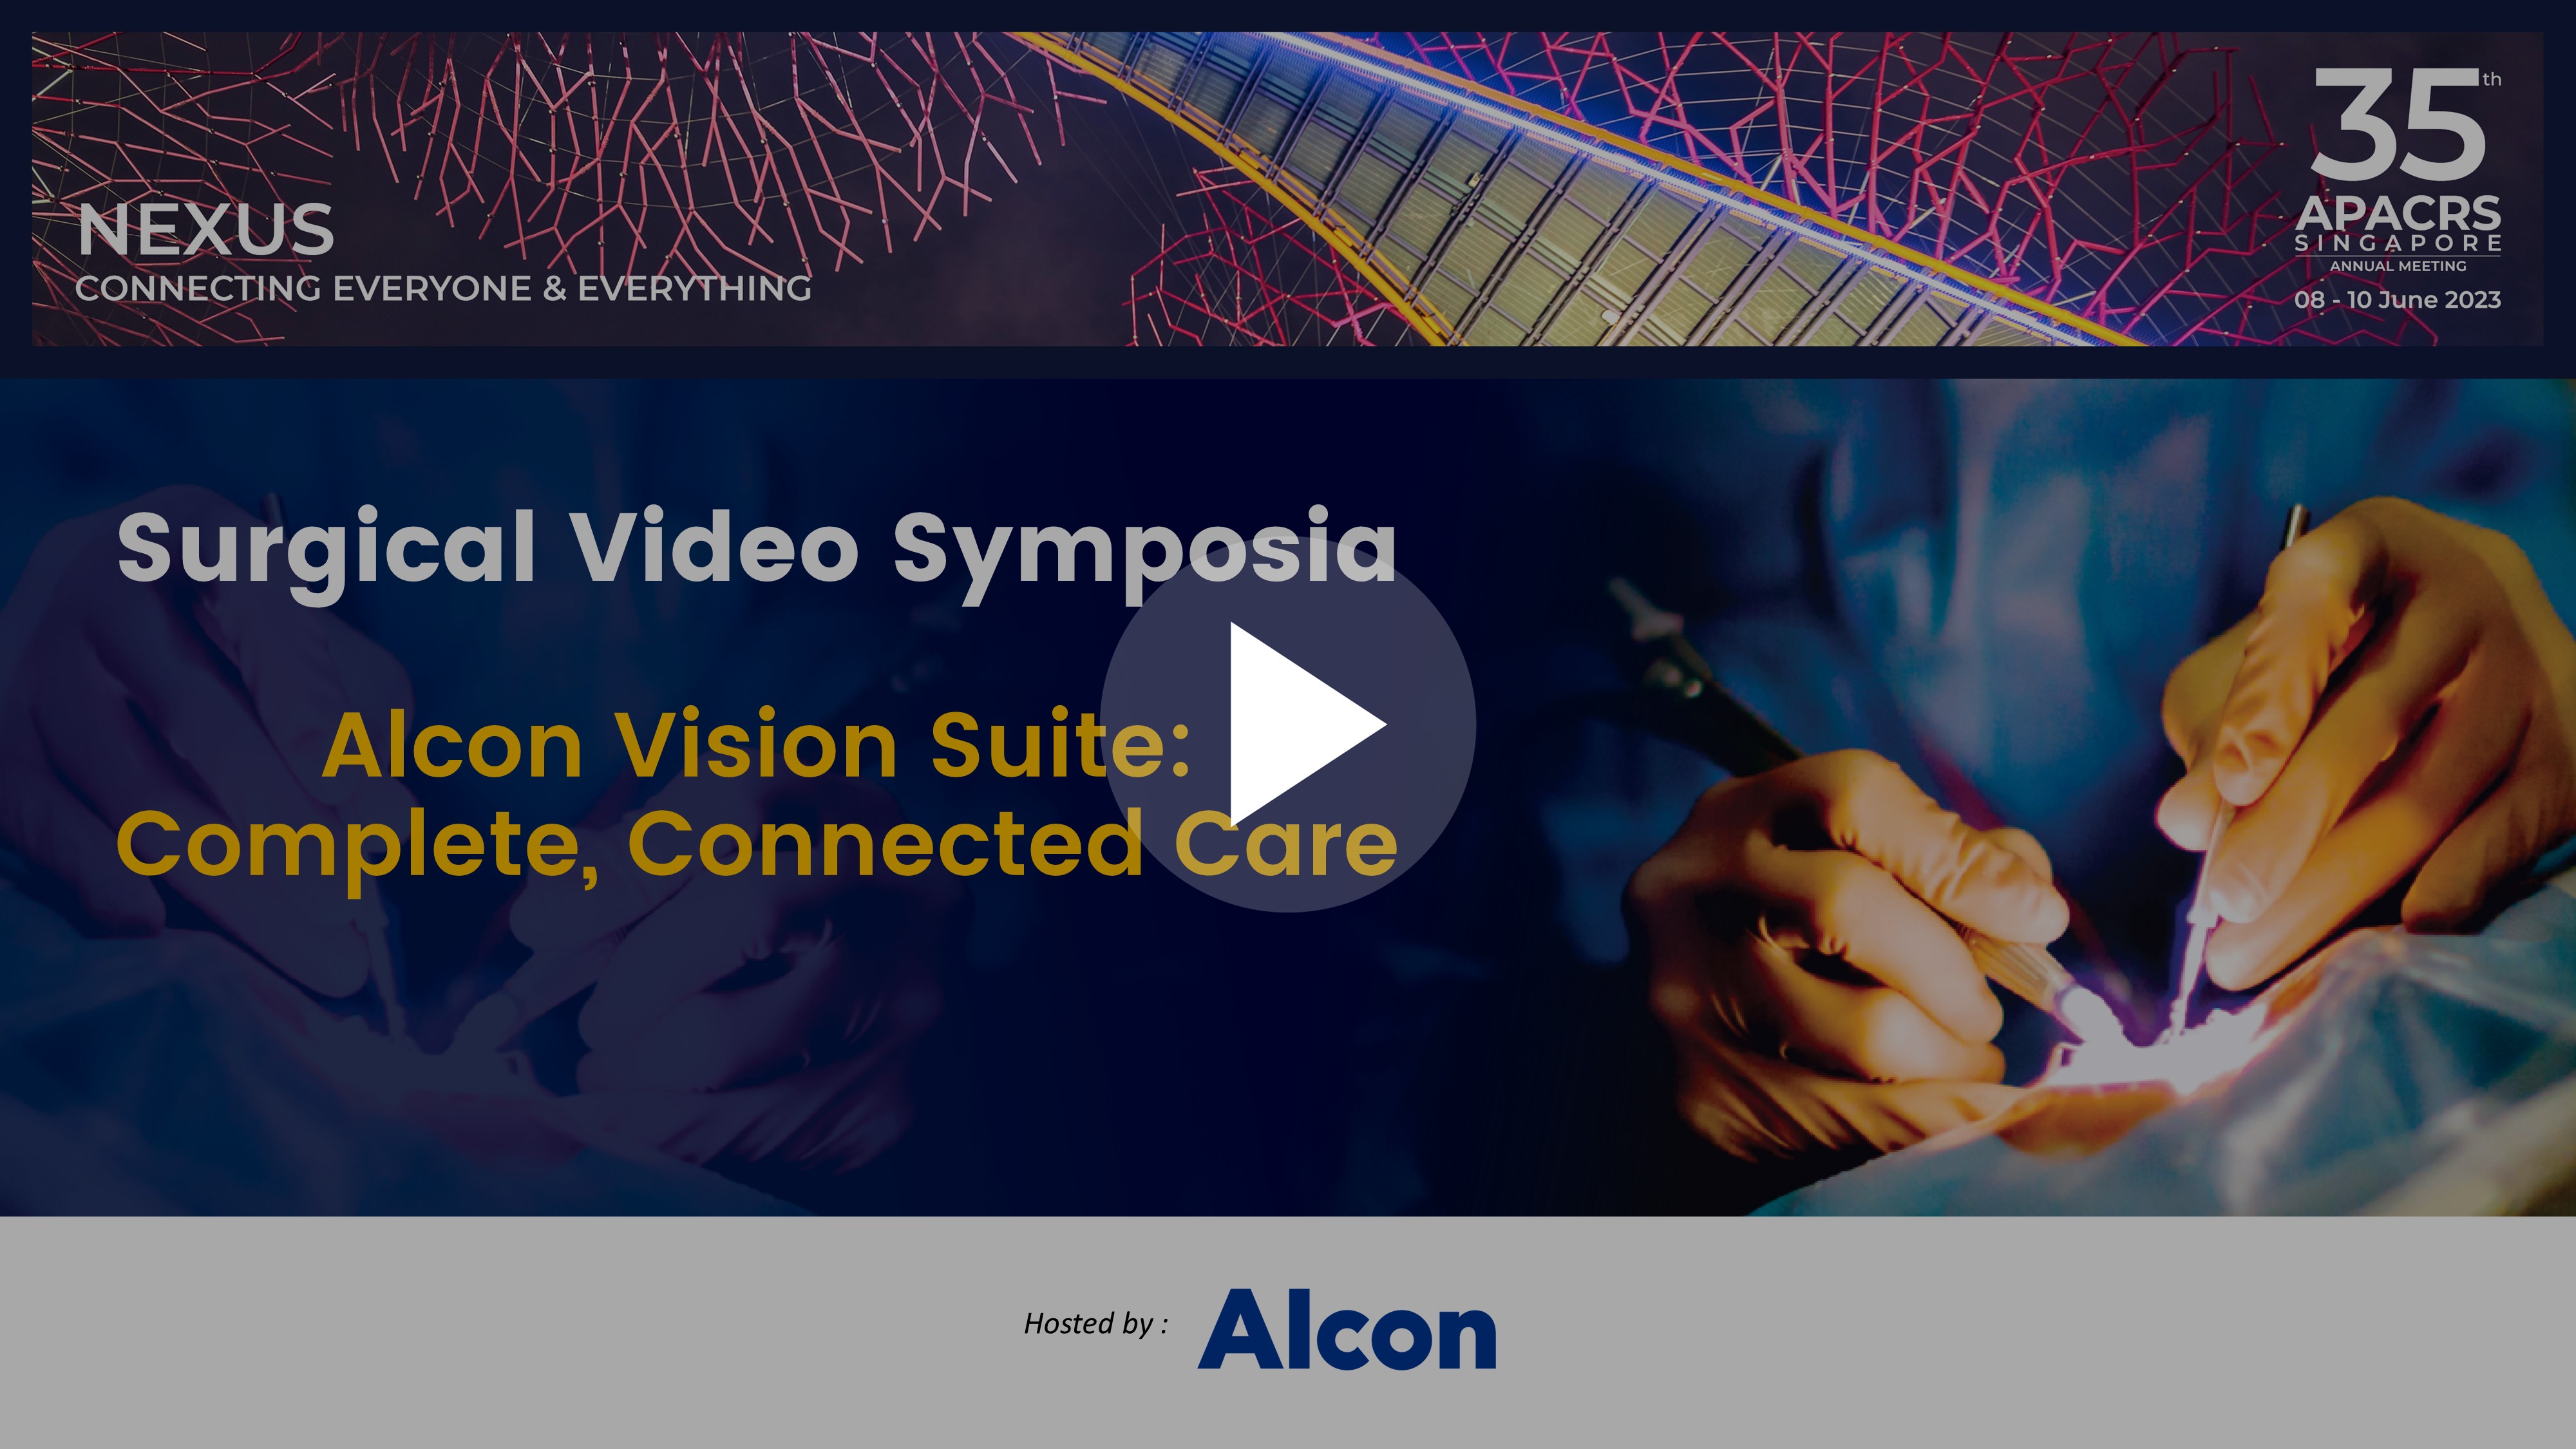 35th APACRS Annual Meeting Alcon Surgical Video thumbnail